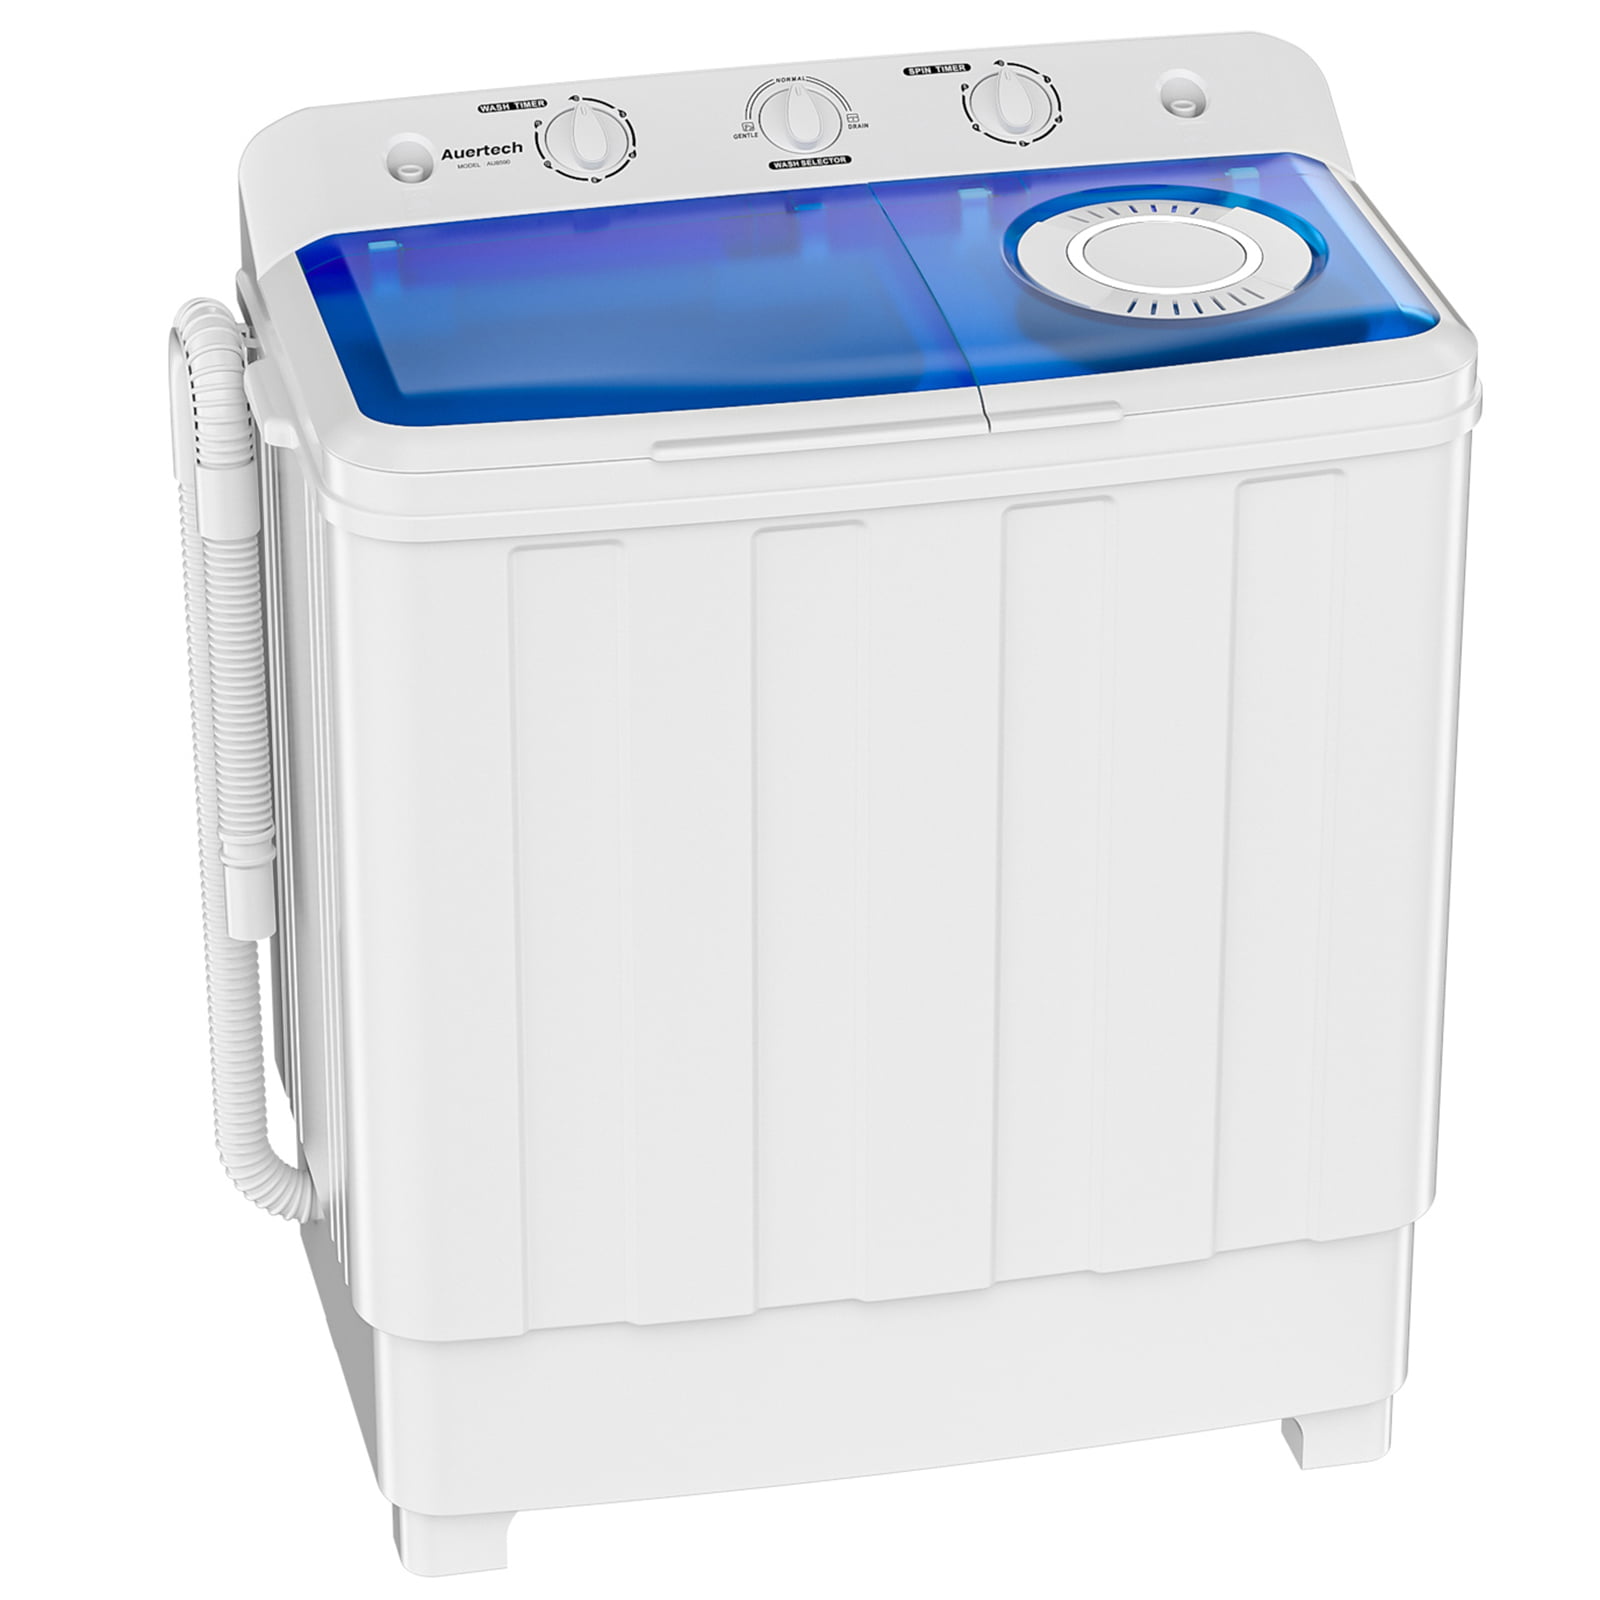 11Lbs Portable Washing Machine Nictemaw 16Lbs Capacity Twin Tub Washer and Dryer Combo &Dryer 5Lbs Semi-Auto with Built-in Drain Pump/Time Control for Home/Apartments/Dorms/RV Mini Washer 